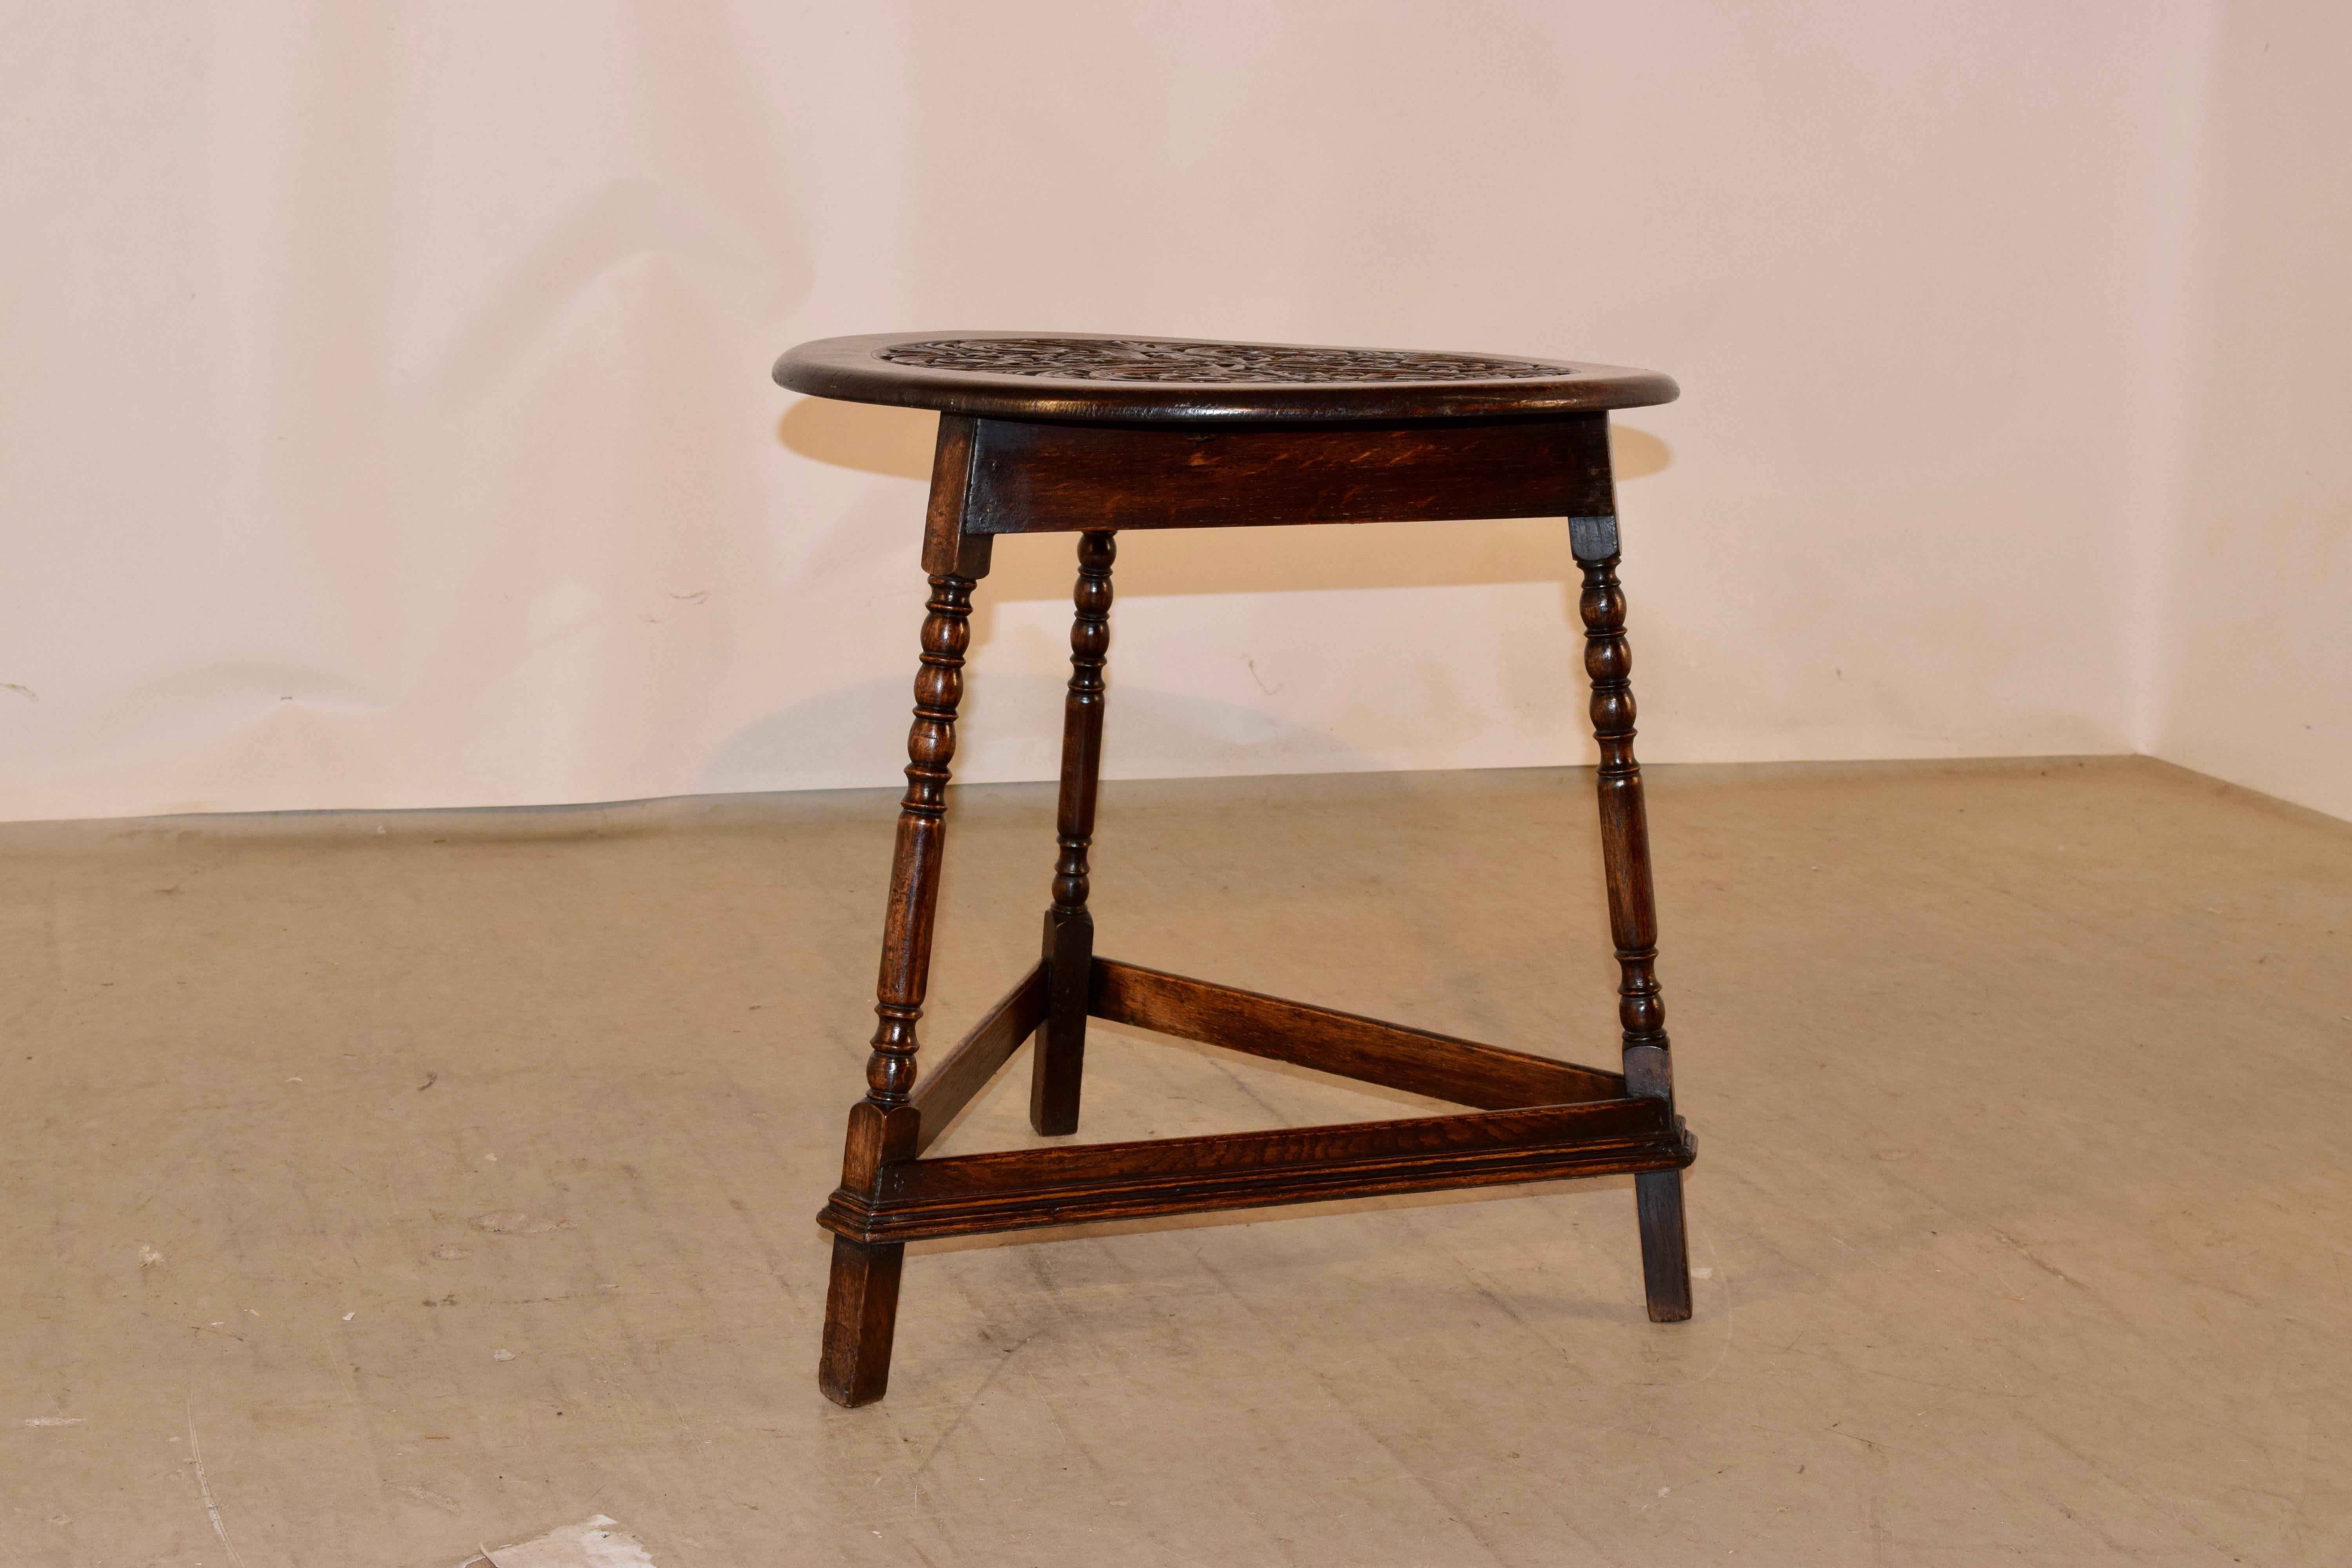 19th century oak side table from England with a fantastic hand carved decorated central medallion, surrounded by a banded edge, over a simple apron and supported on three hand turned legs, joined by molded stretchers.